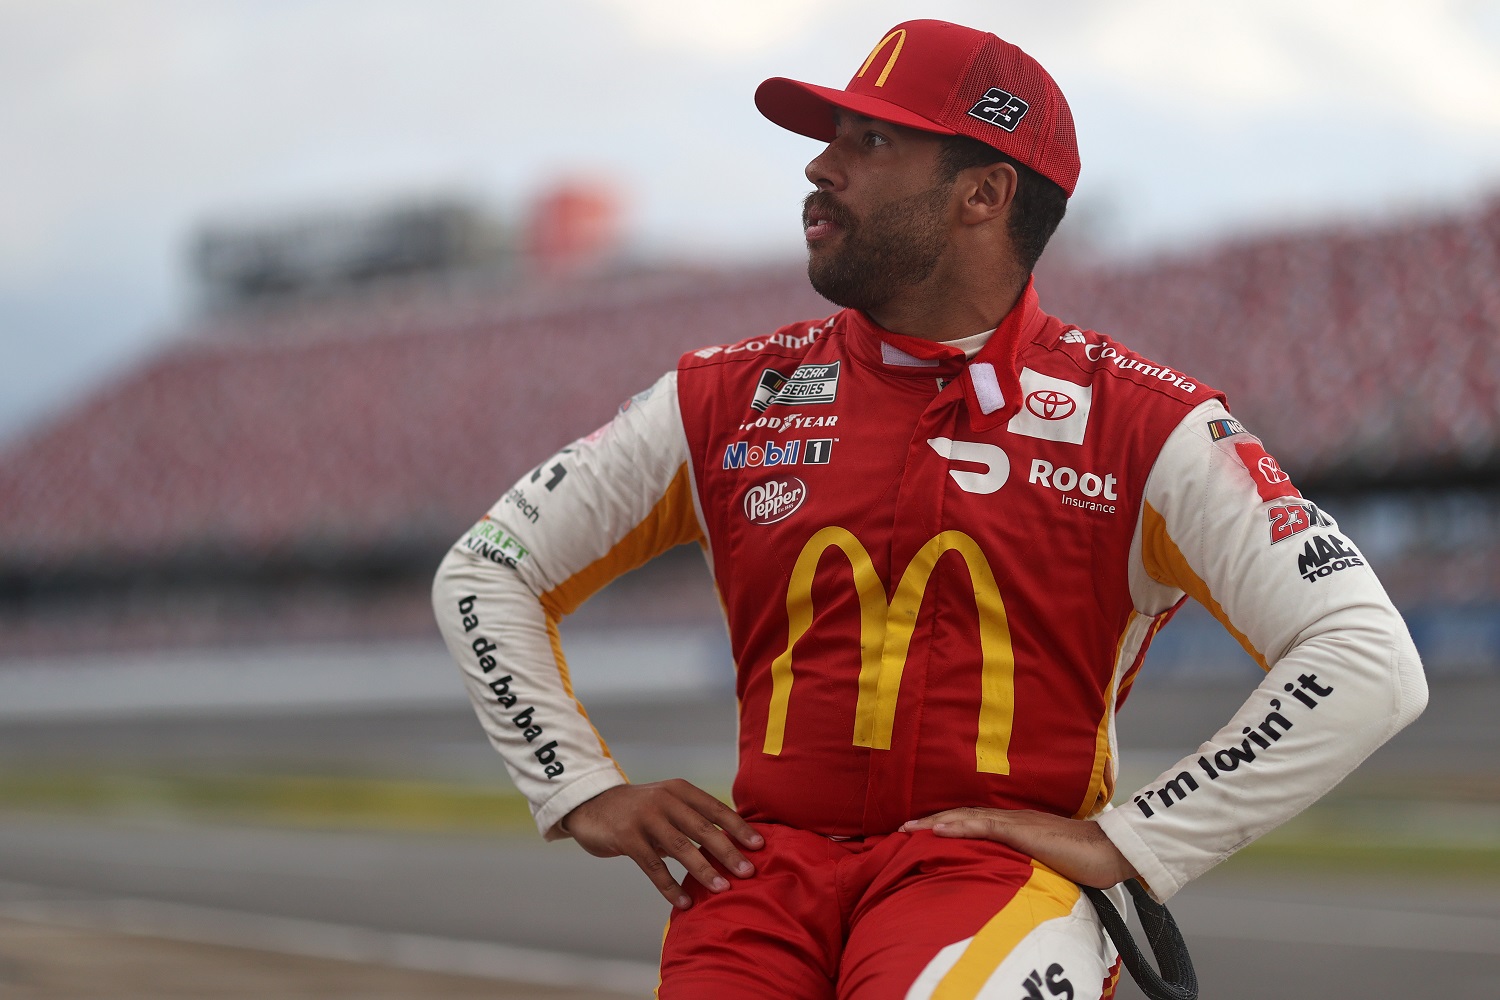 Bubba Wallace, driver of the No. 23 Toyota, waits prior to victory lane ceremonies after winning the rain-shortened NASCAR Cup Series YellaWood 500 at Talladega Superspeedway on Oct. 4, 2021.